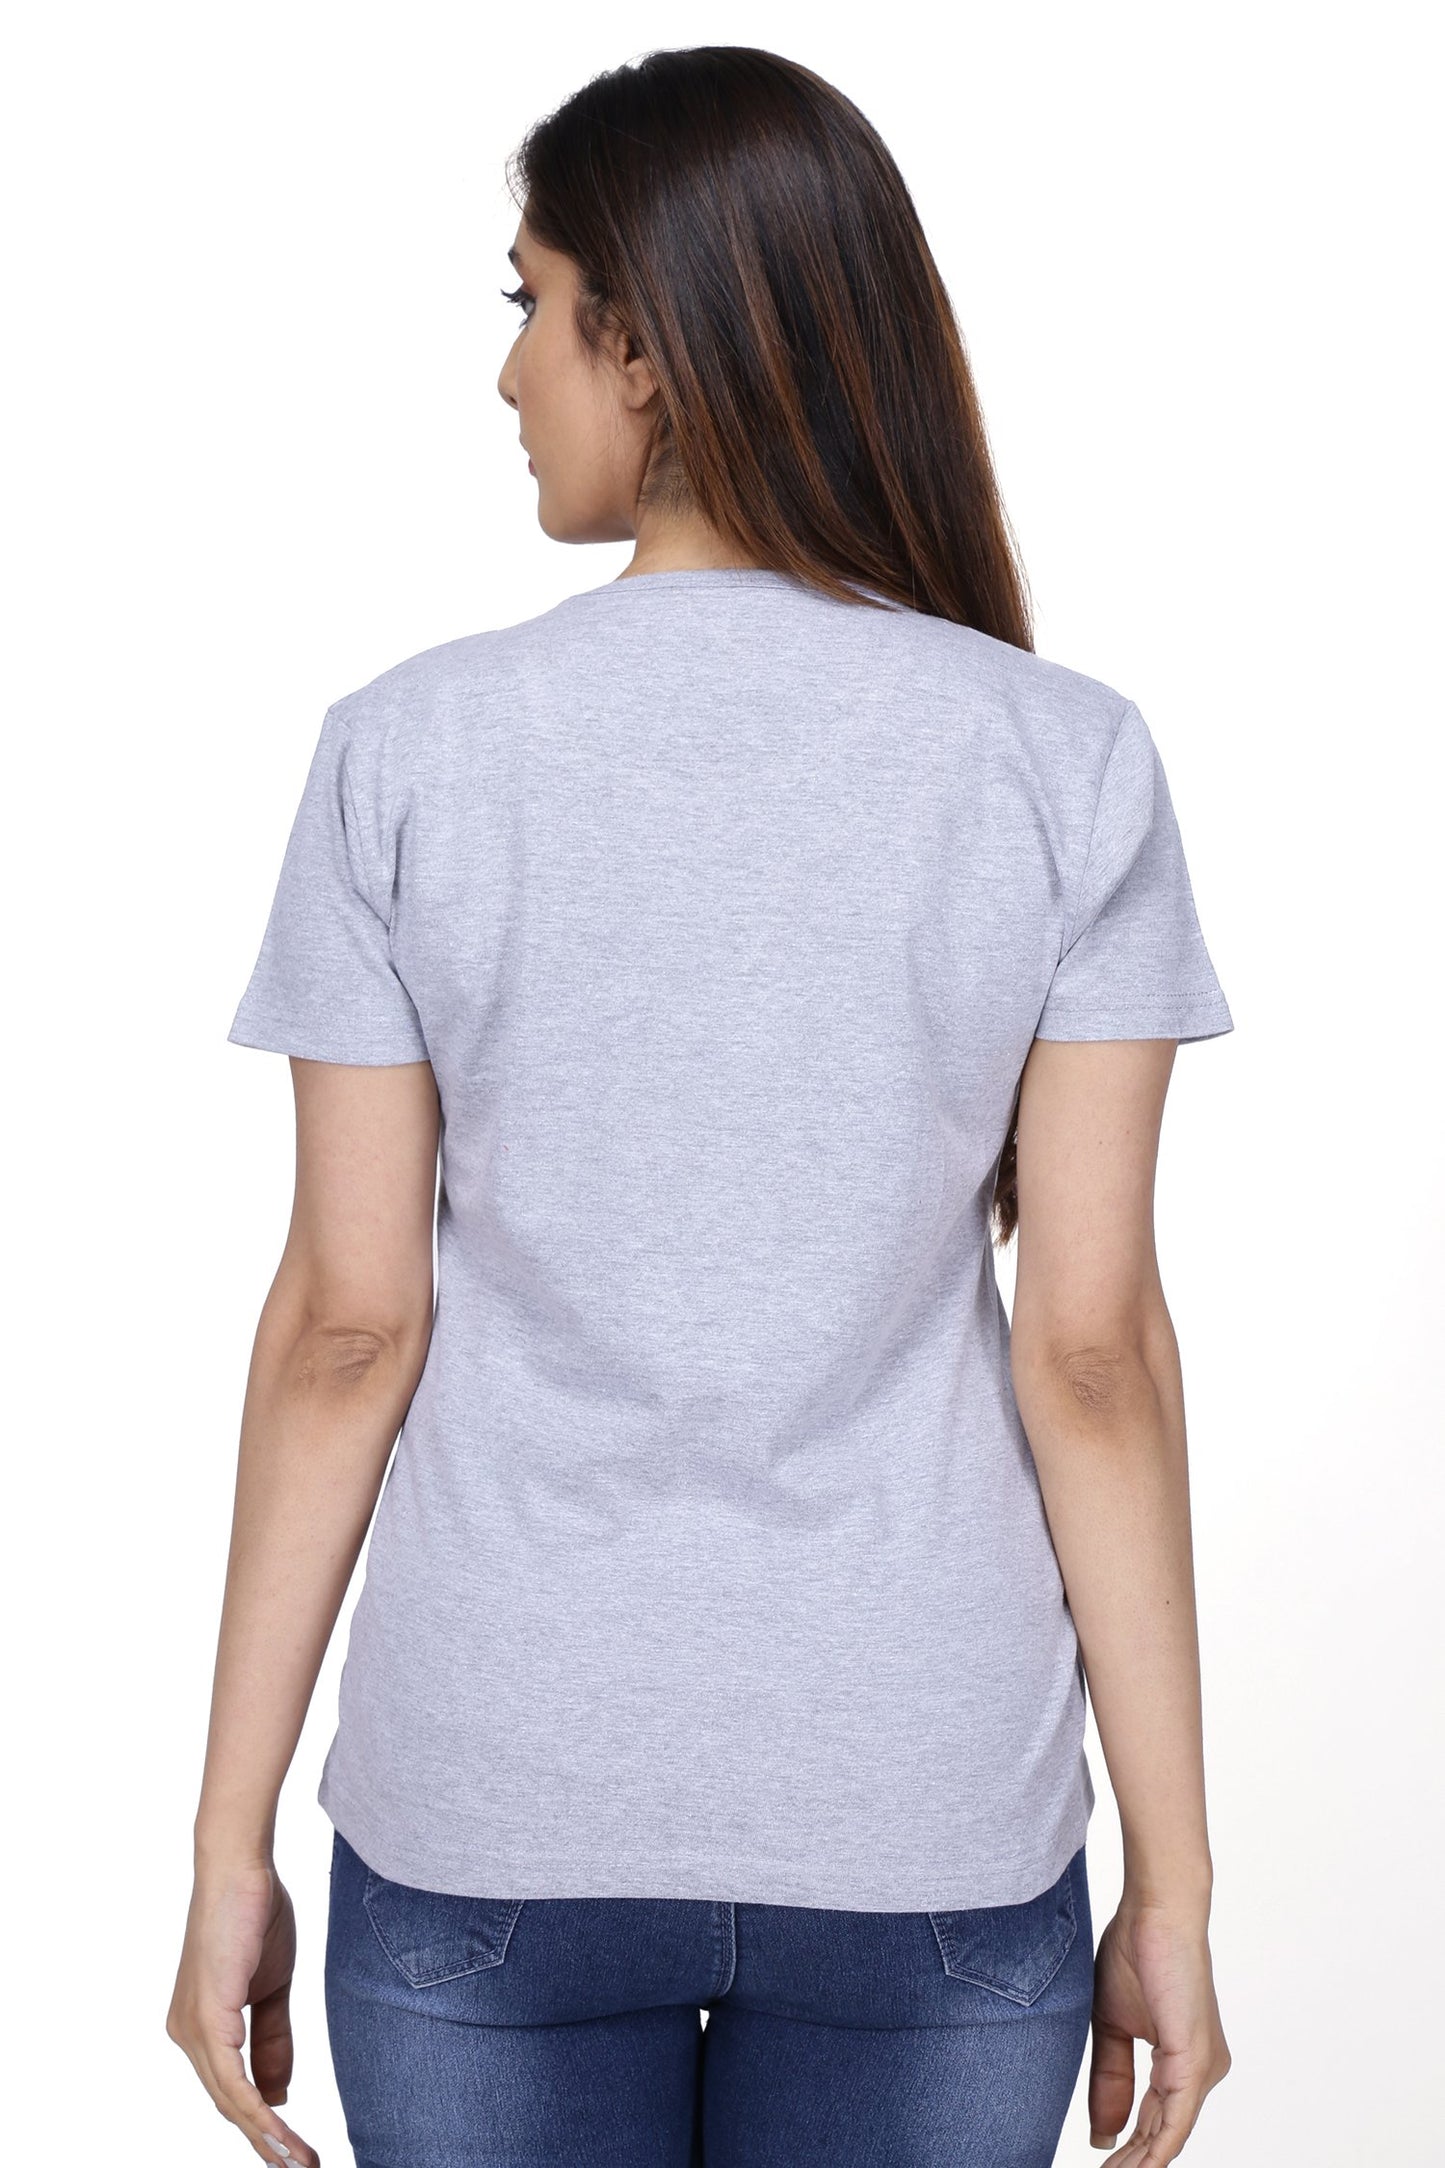 NEO GARMENTS Women's Cotton Round Neck T-shirt - MEOW | SIZE FROM S-32" TO 8XL-52"